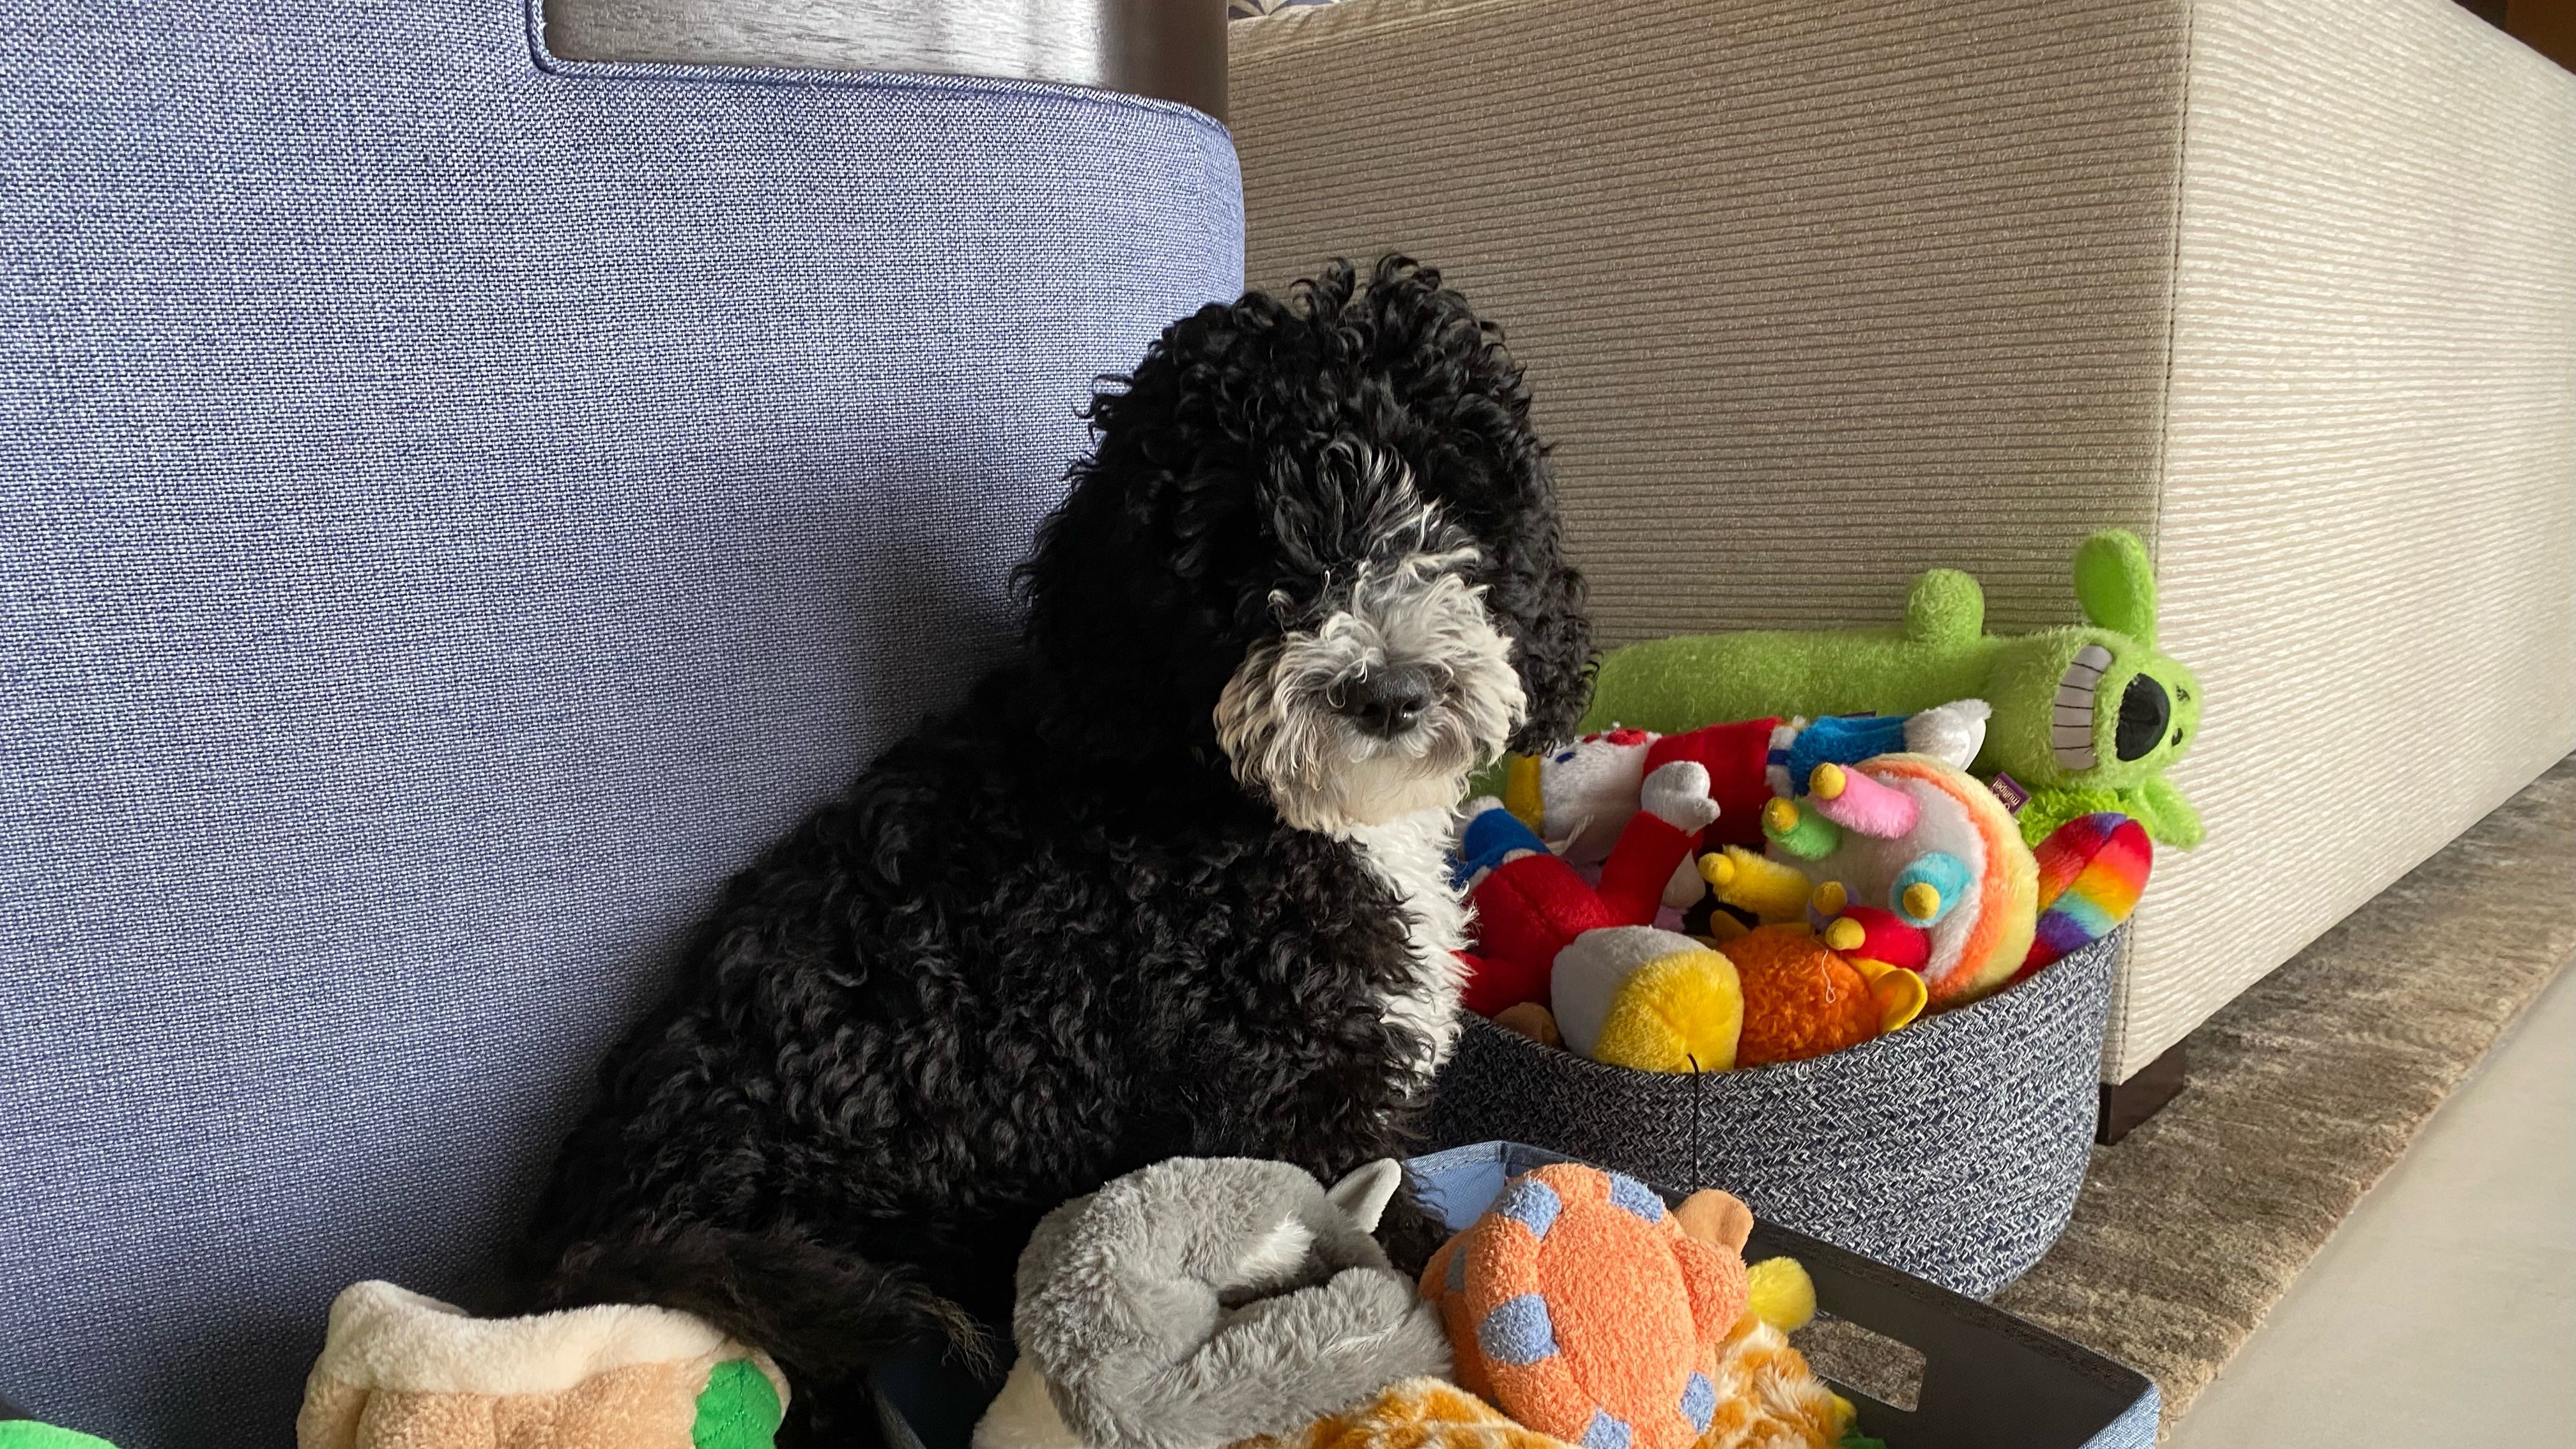 Turns Out Your Pet Can Only See Toys If